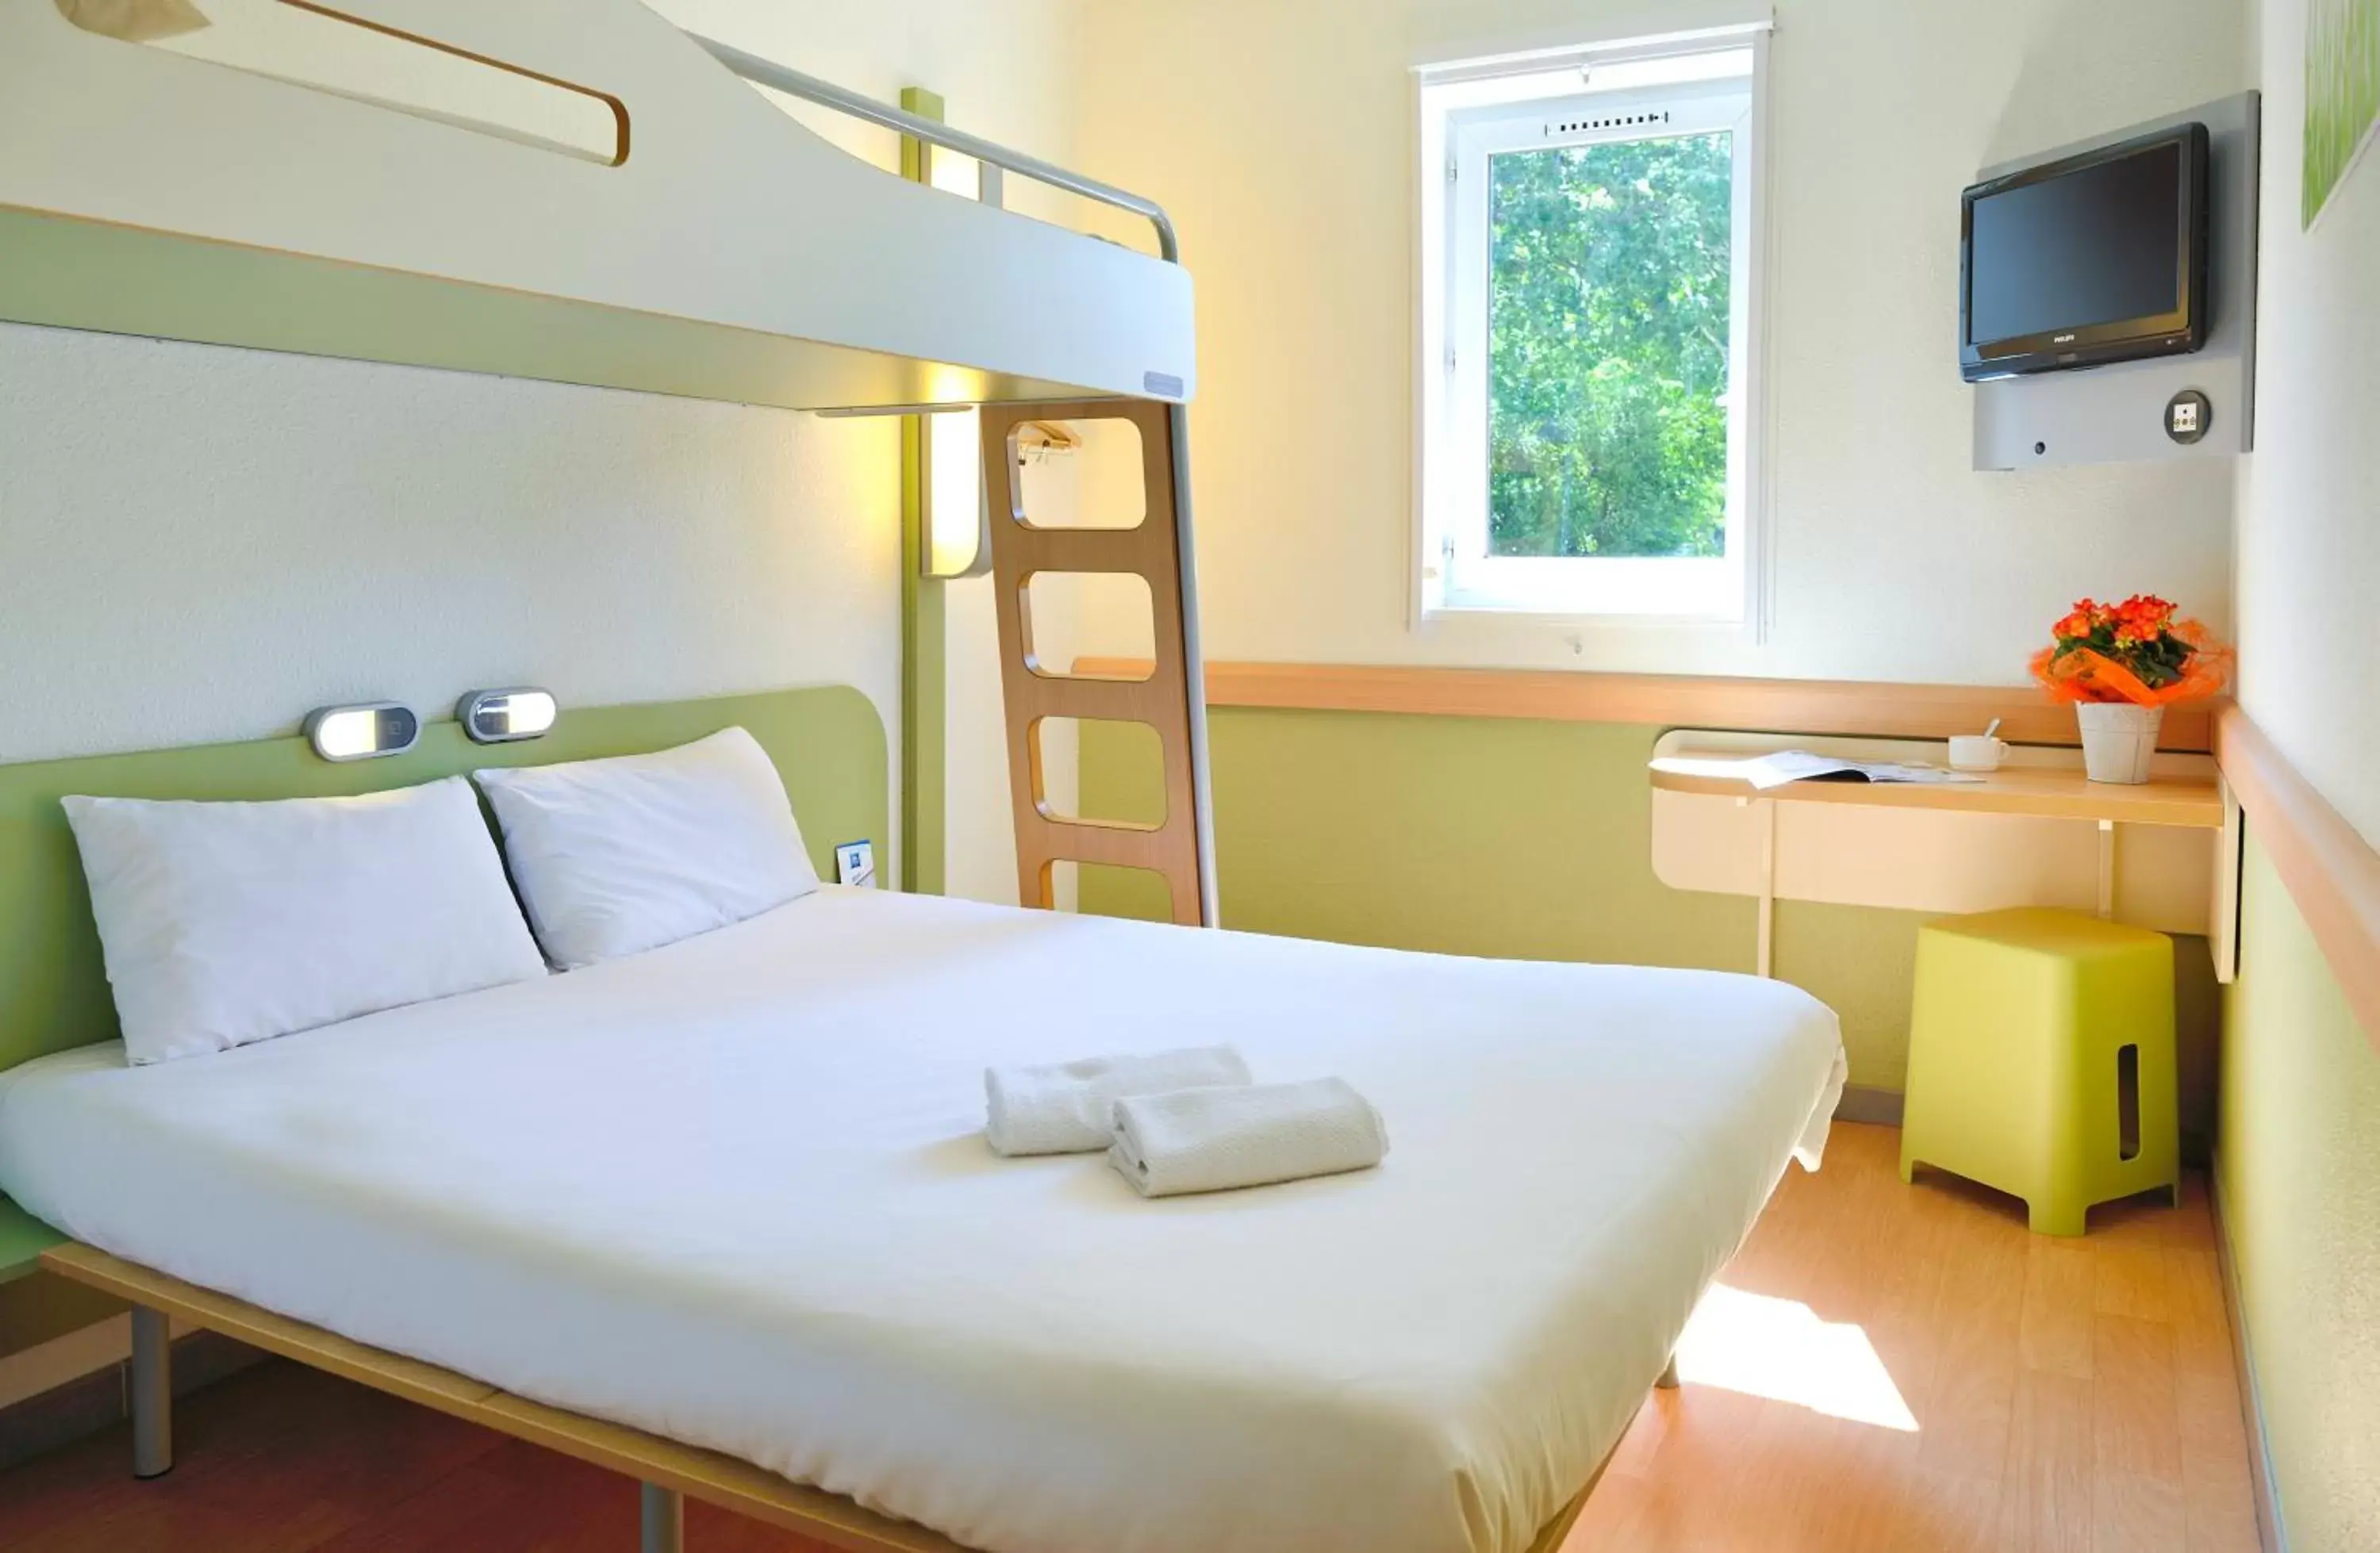 Double Room with Bunk Bed in ibis budget Marne la Vallée Bry sur Marne